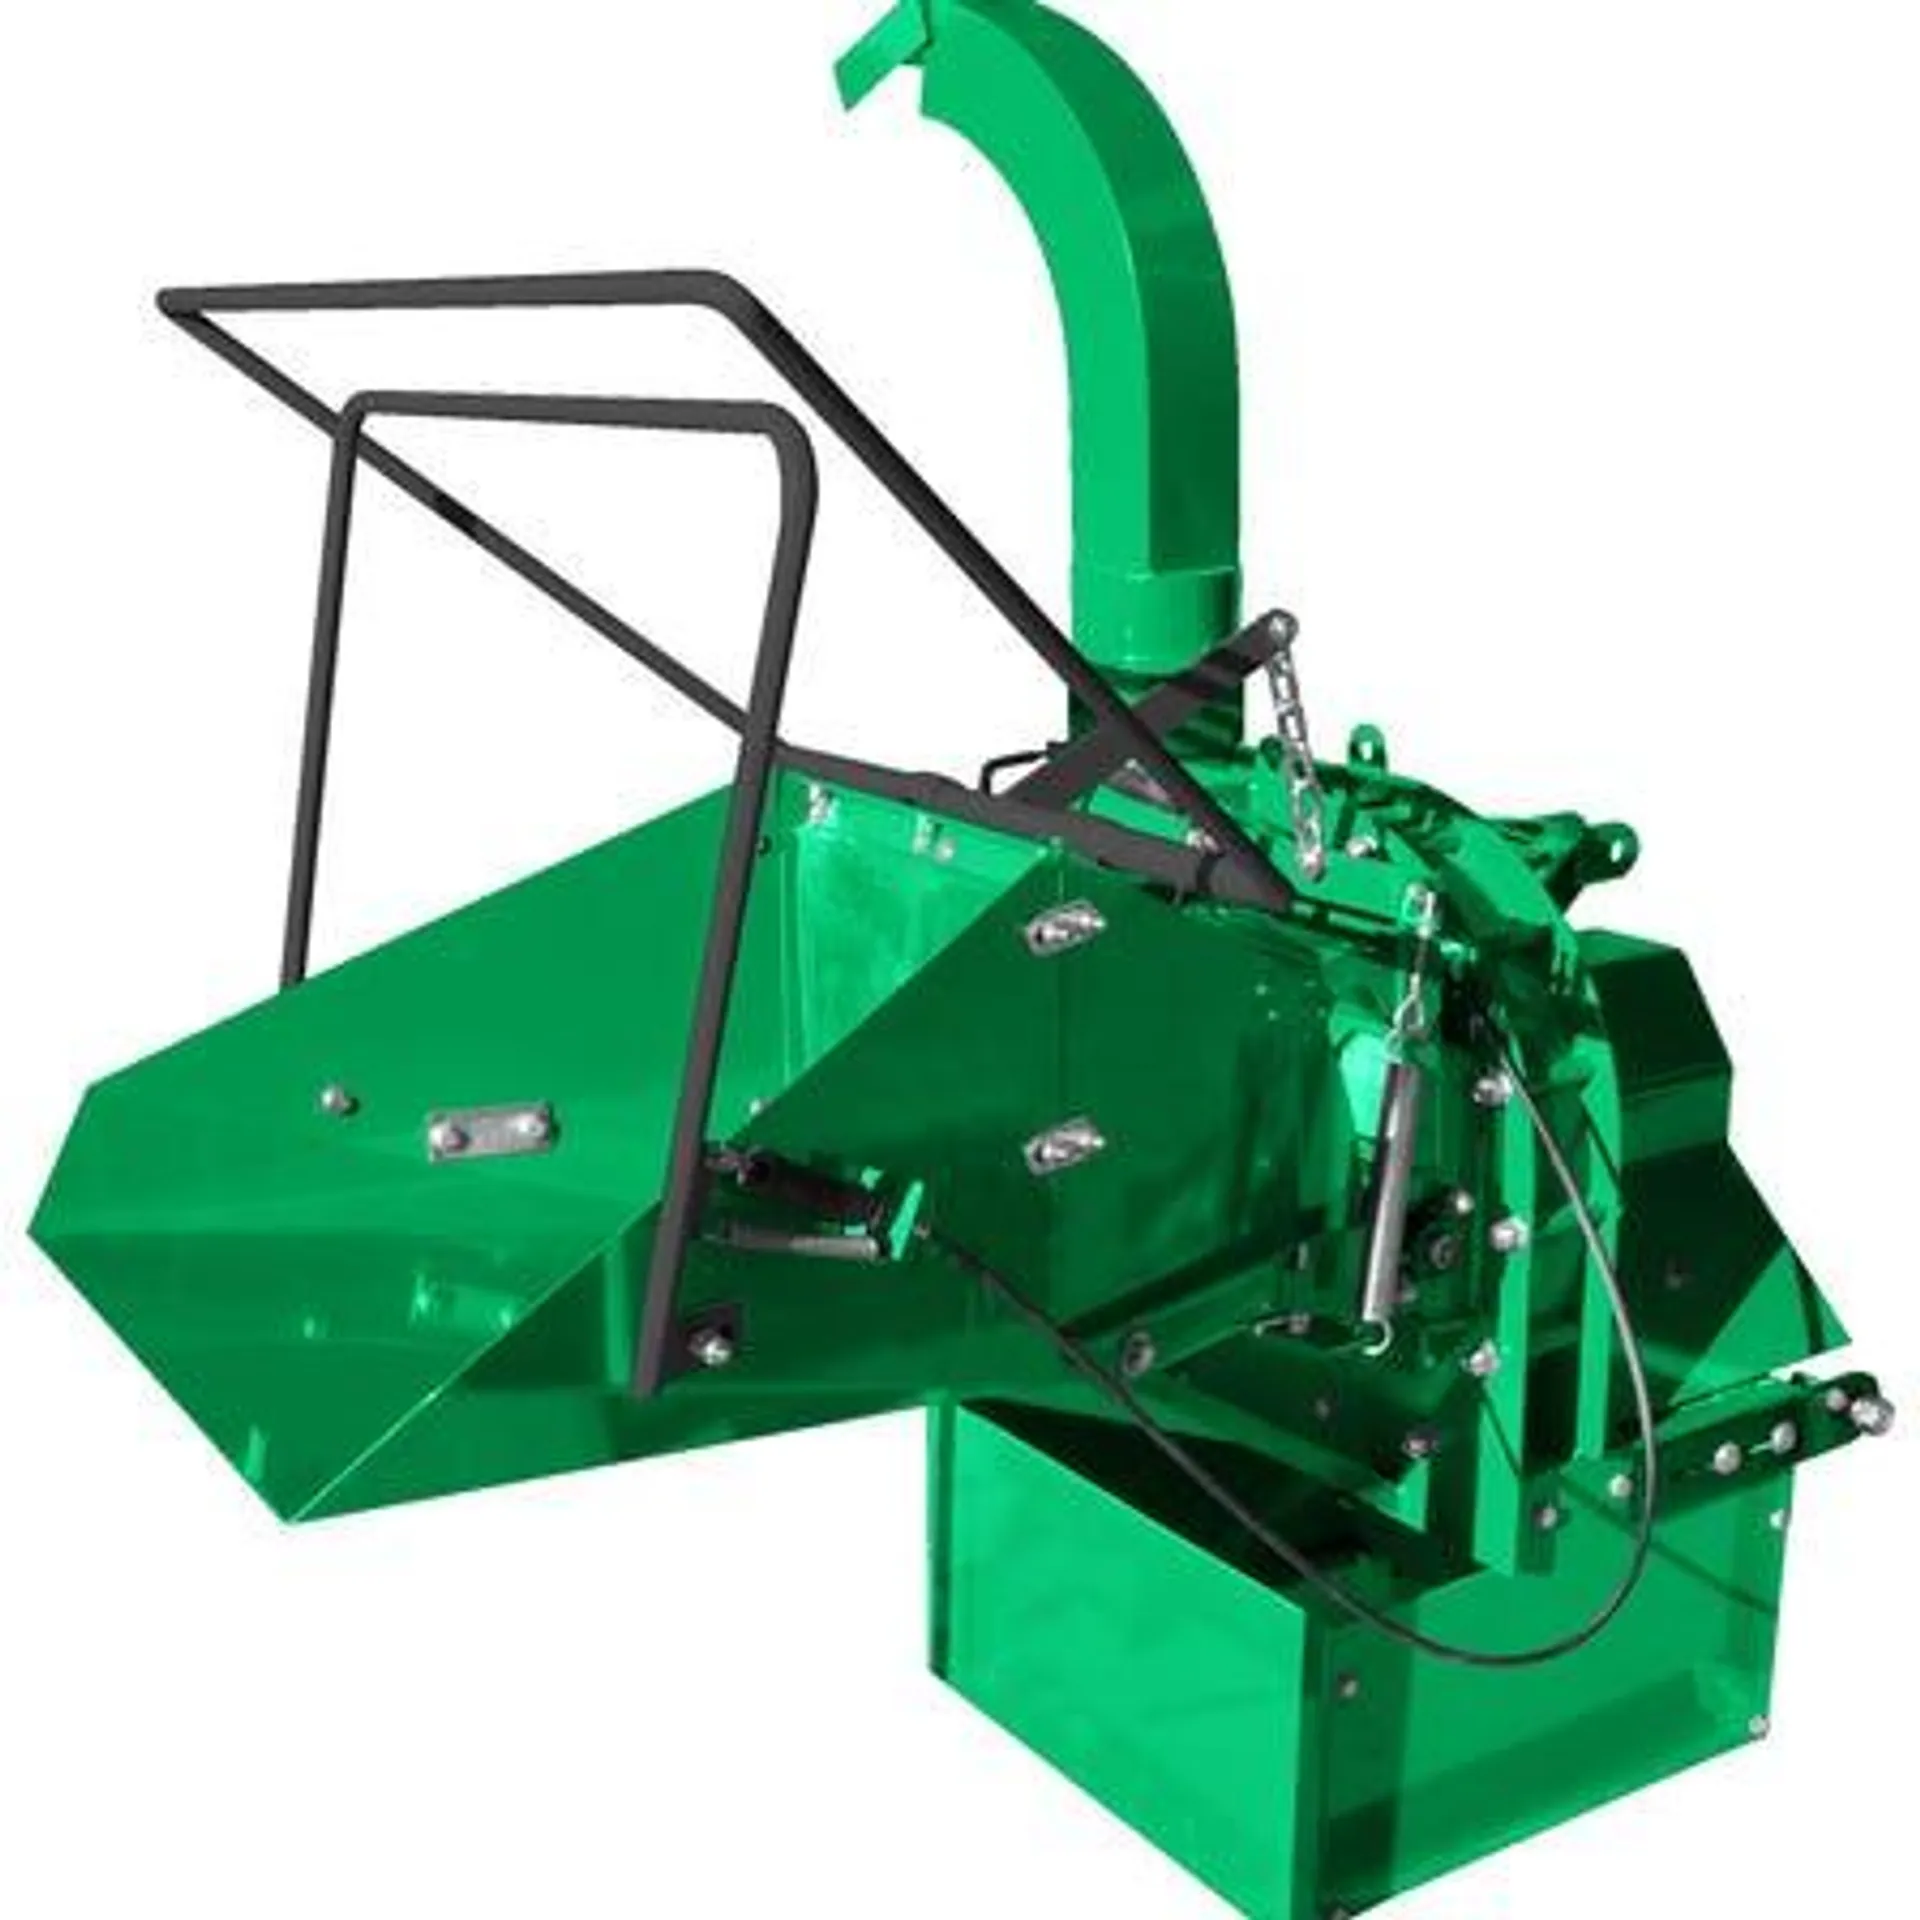 150mm PTO Wood Chipper for 25hp+ Tractors